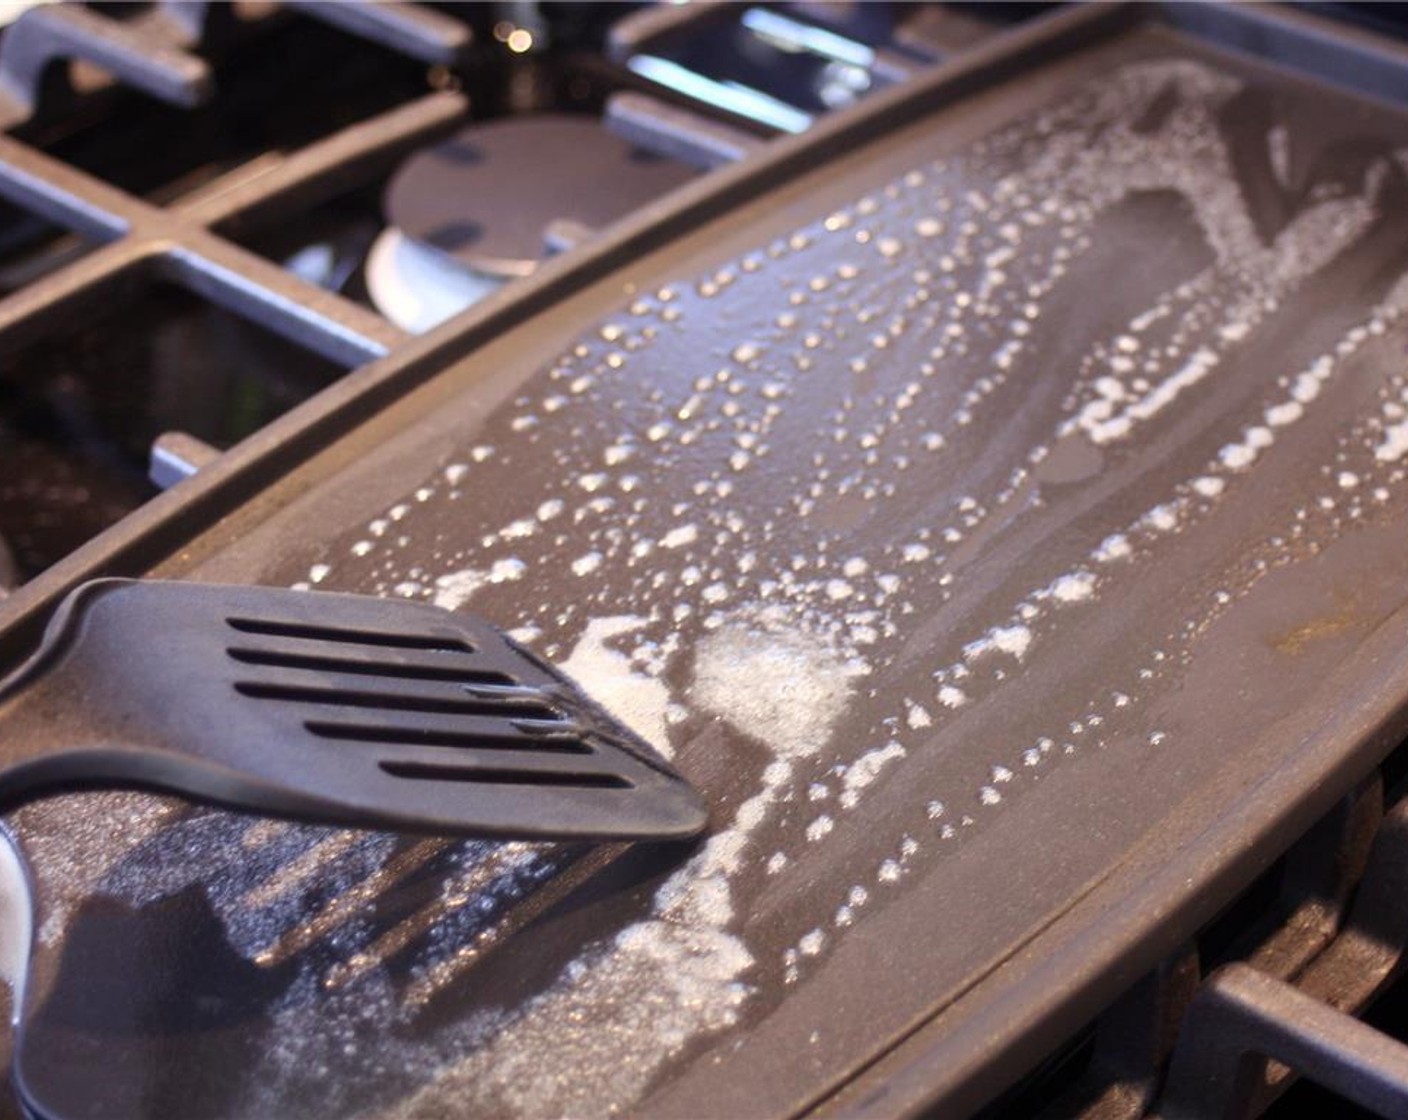 step 7 During the last 5 minutes of the batter rest period preheat your griddle or skillet on medium heat. Spray the griddle/skillet with Nonstick Cooking Spray (as needed) or grease lightly with vegan butter.